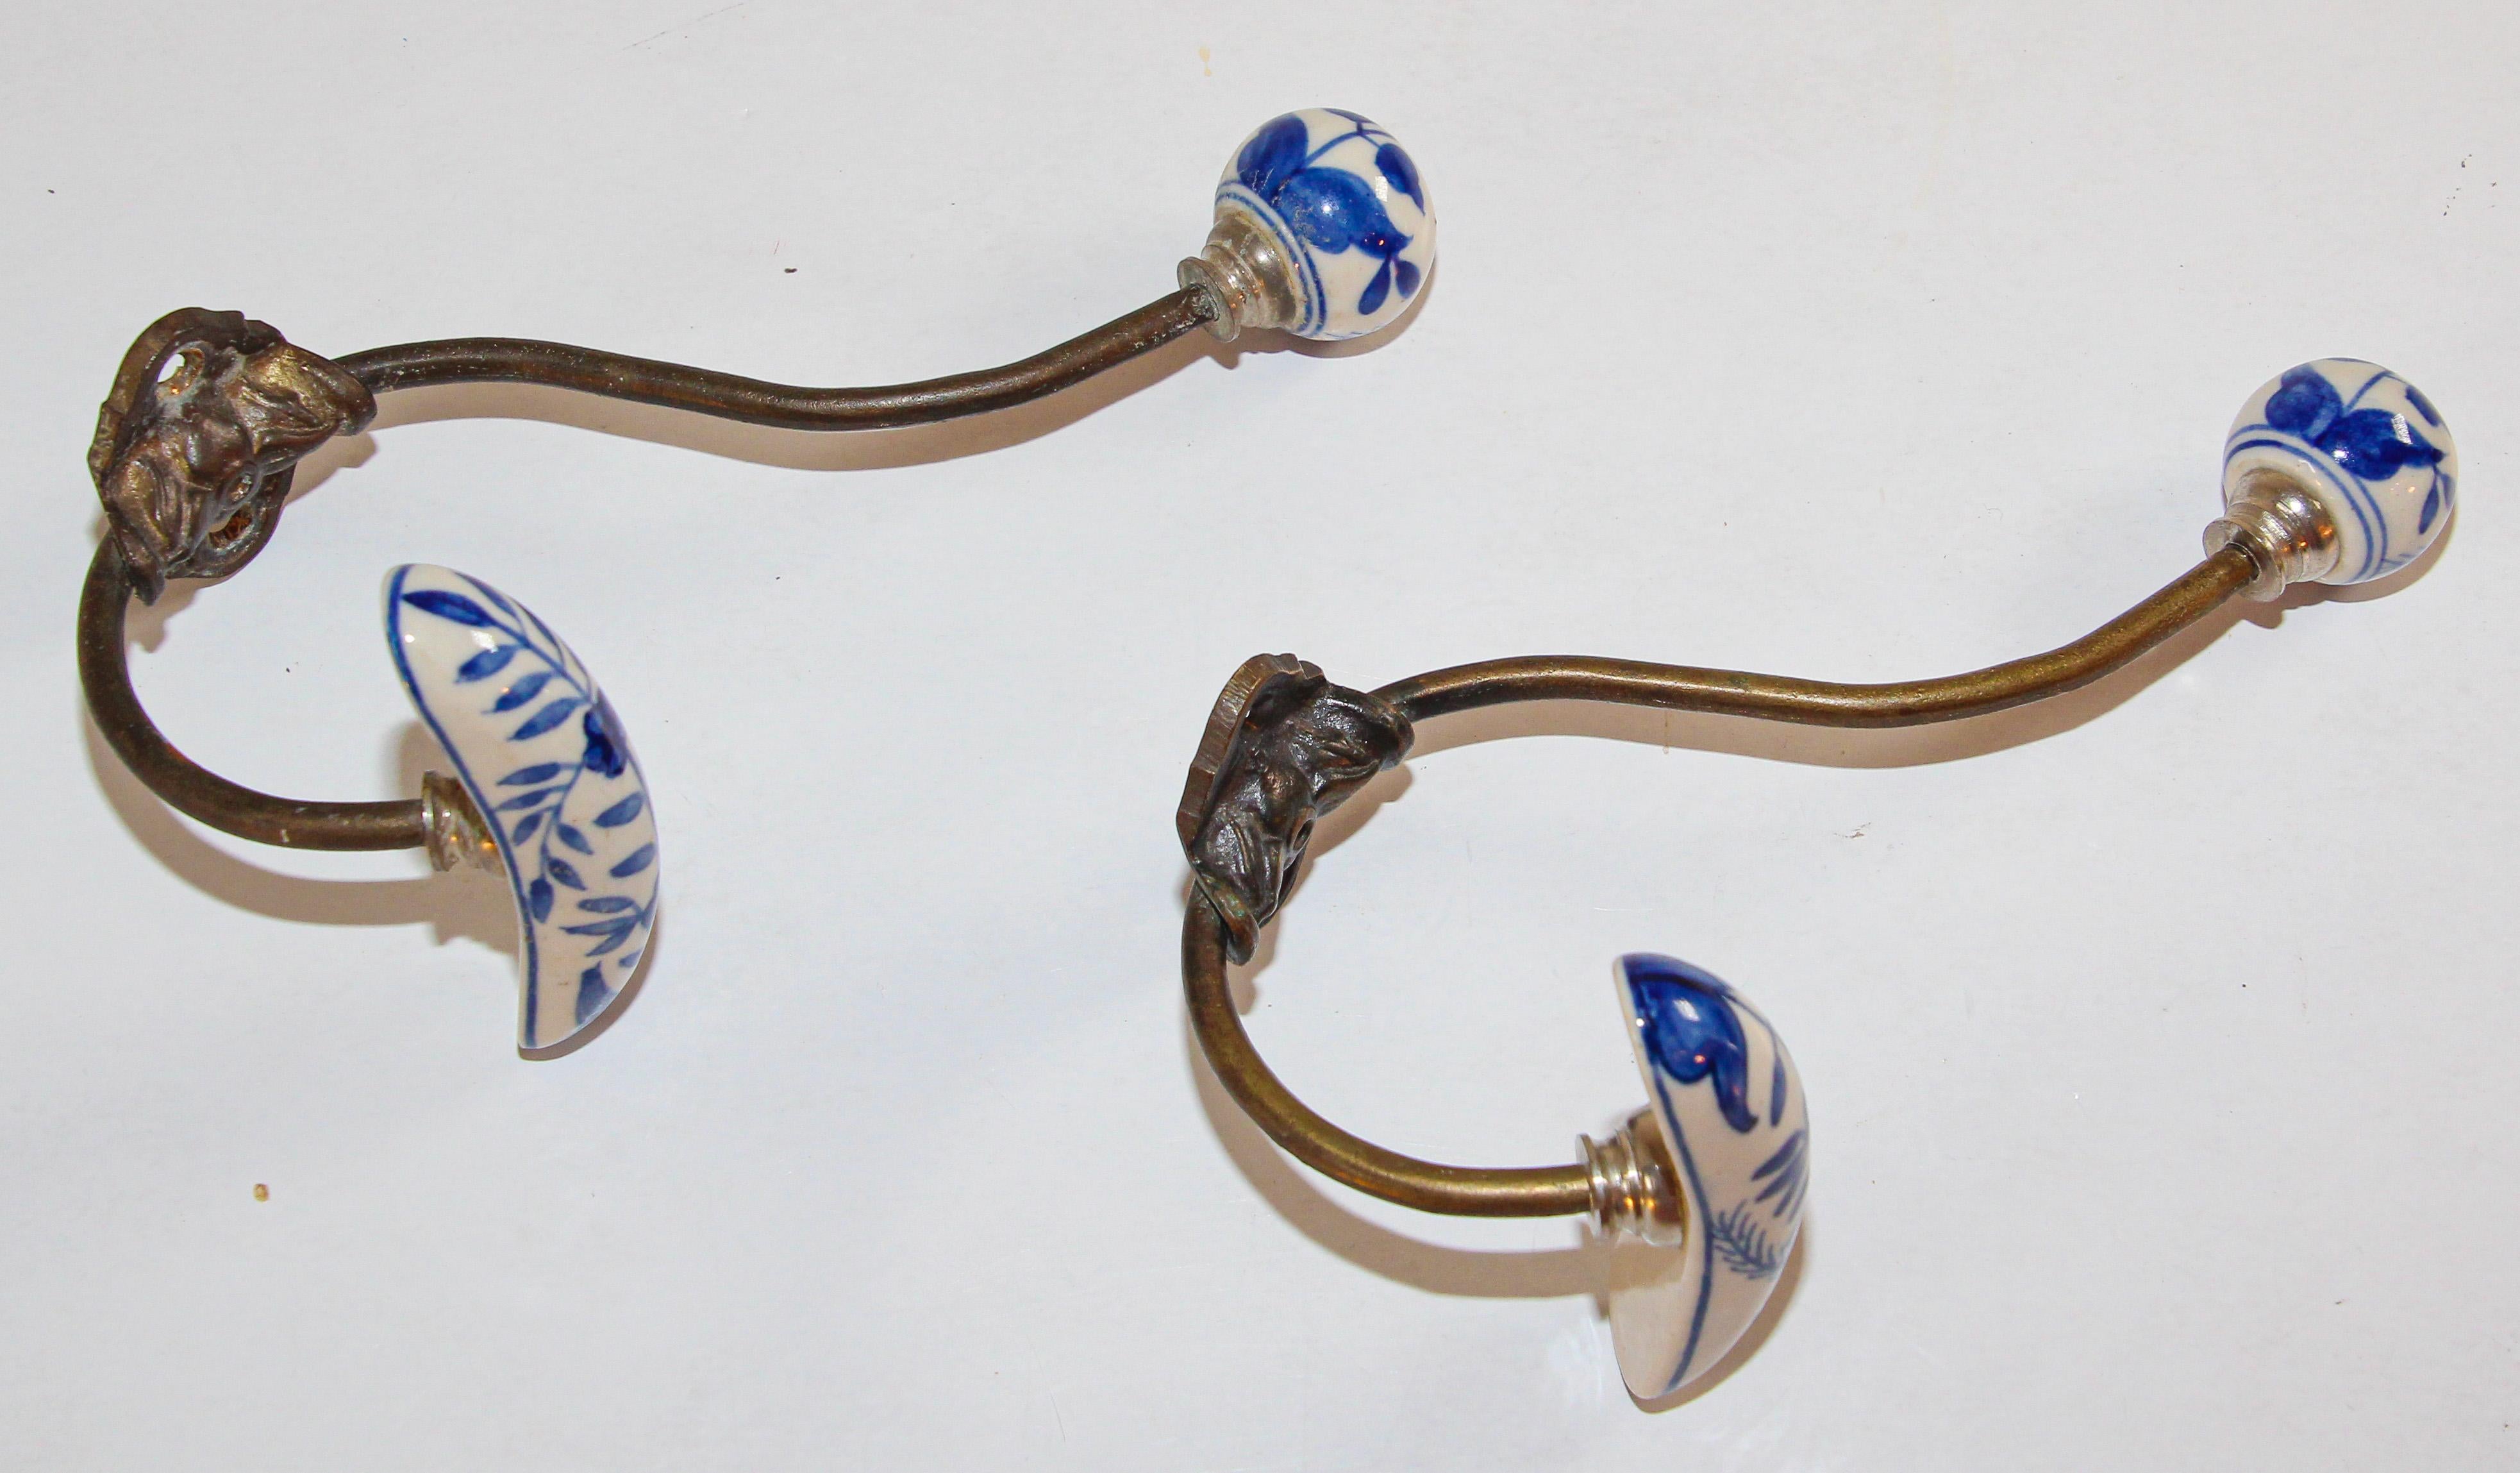 Vintage metal brass coat double hook with porcelain finals in blue and white Dutch Delft style floral design.
 This has a horizontal shaped bar which slopes downwards and is for hanging clothes, hats etc.
The hook is fastened to a shaped cartouche